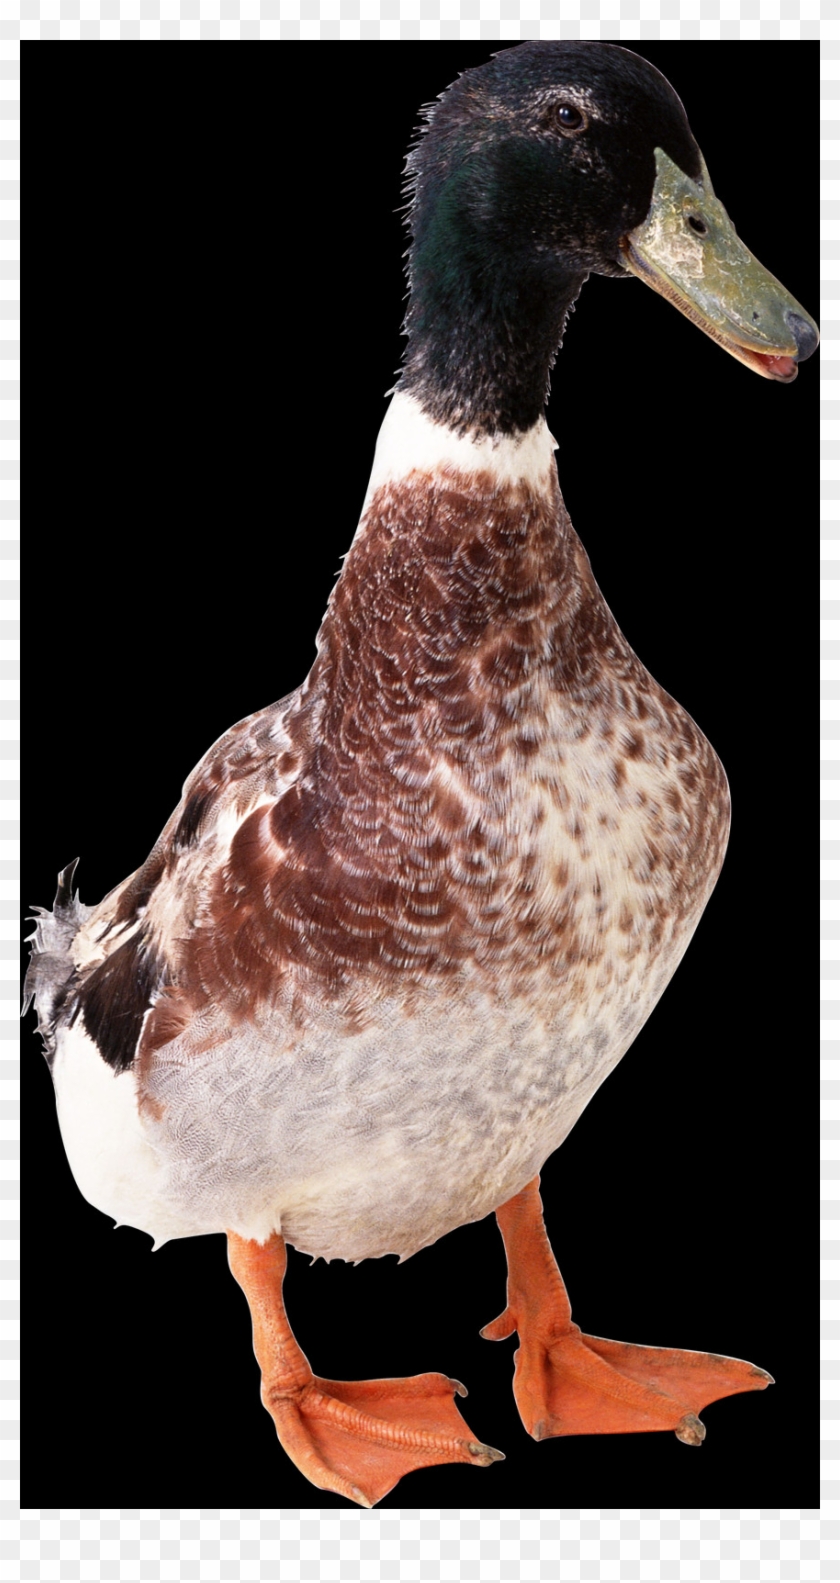 Brown Color Duck, HD Png Download - 871x1600(#2202196) - PngFind